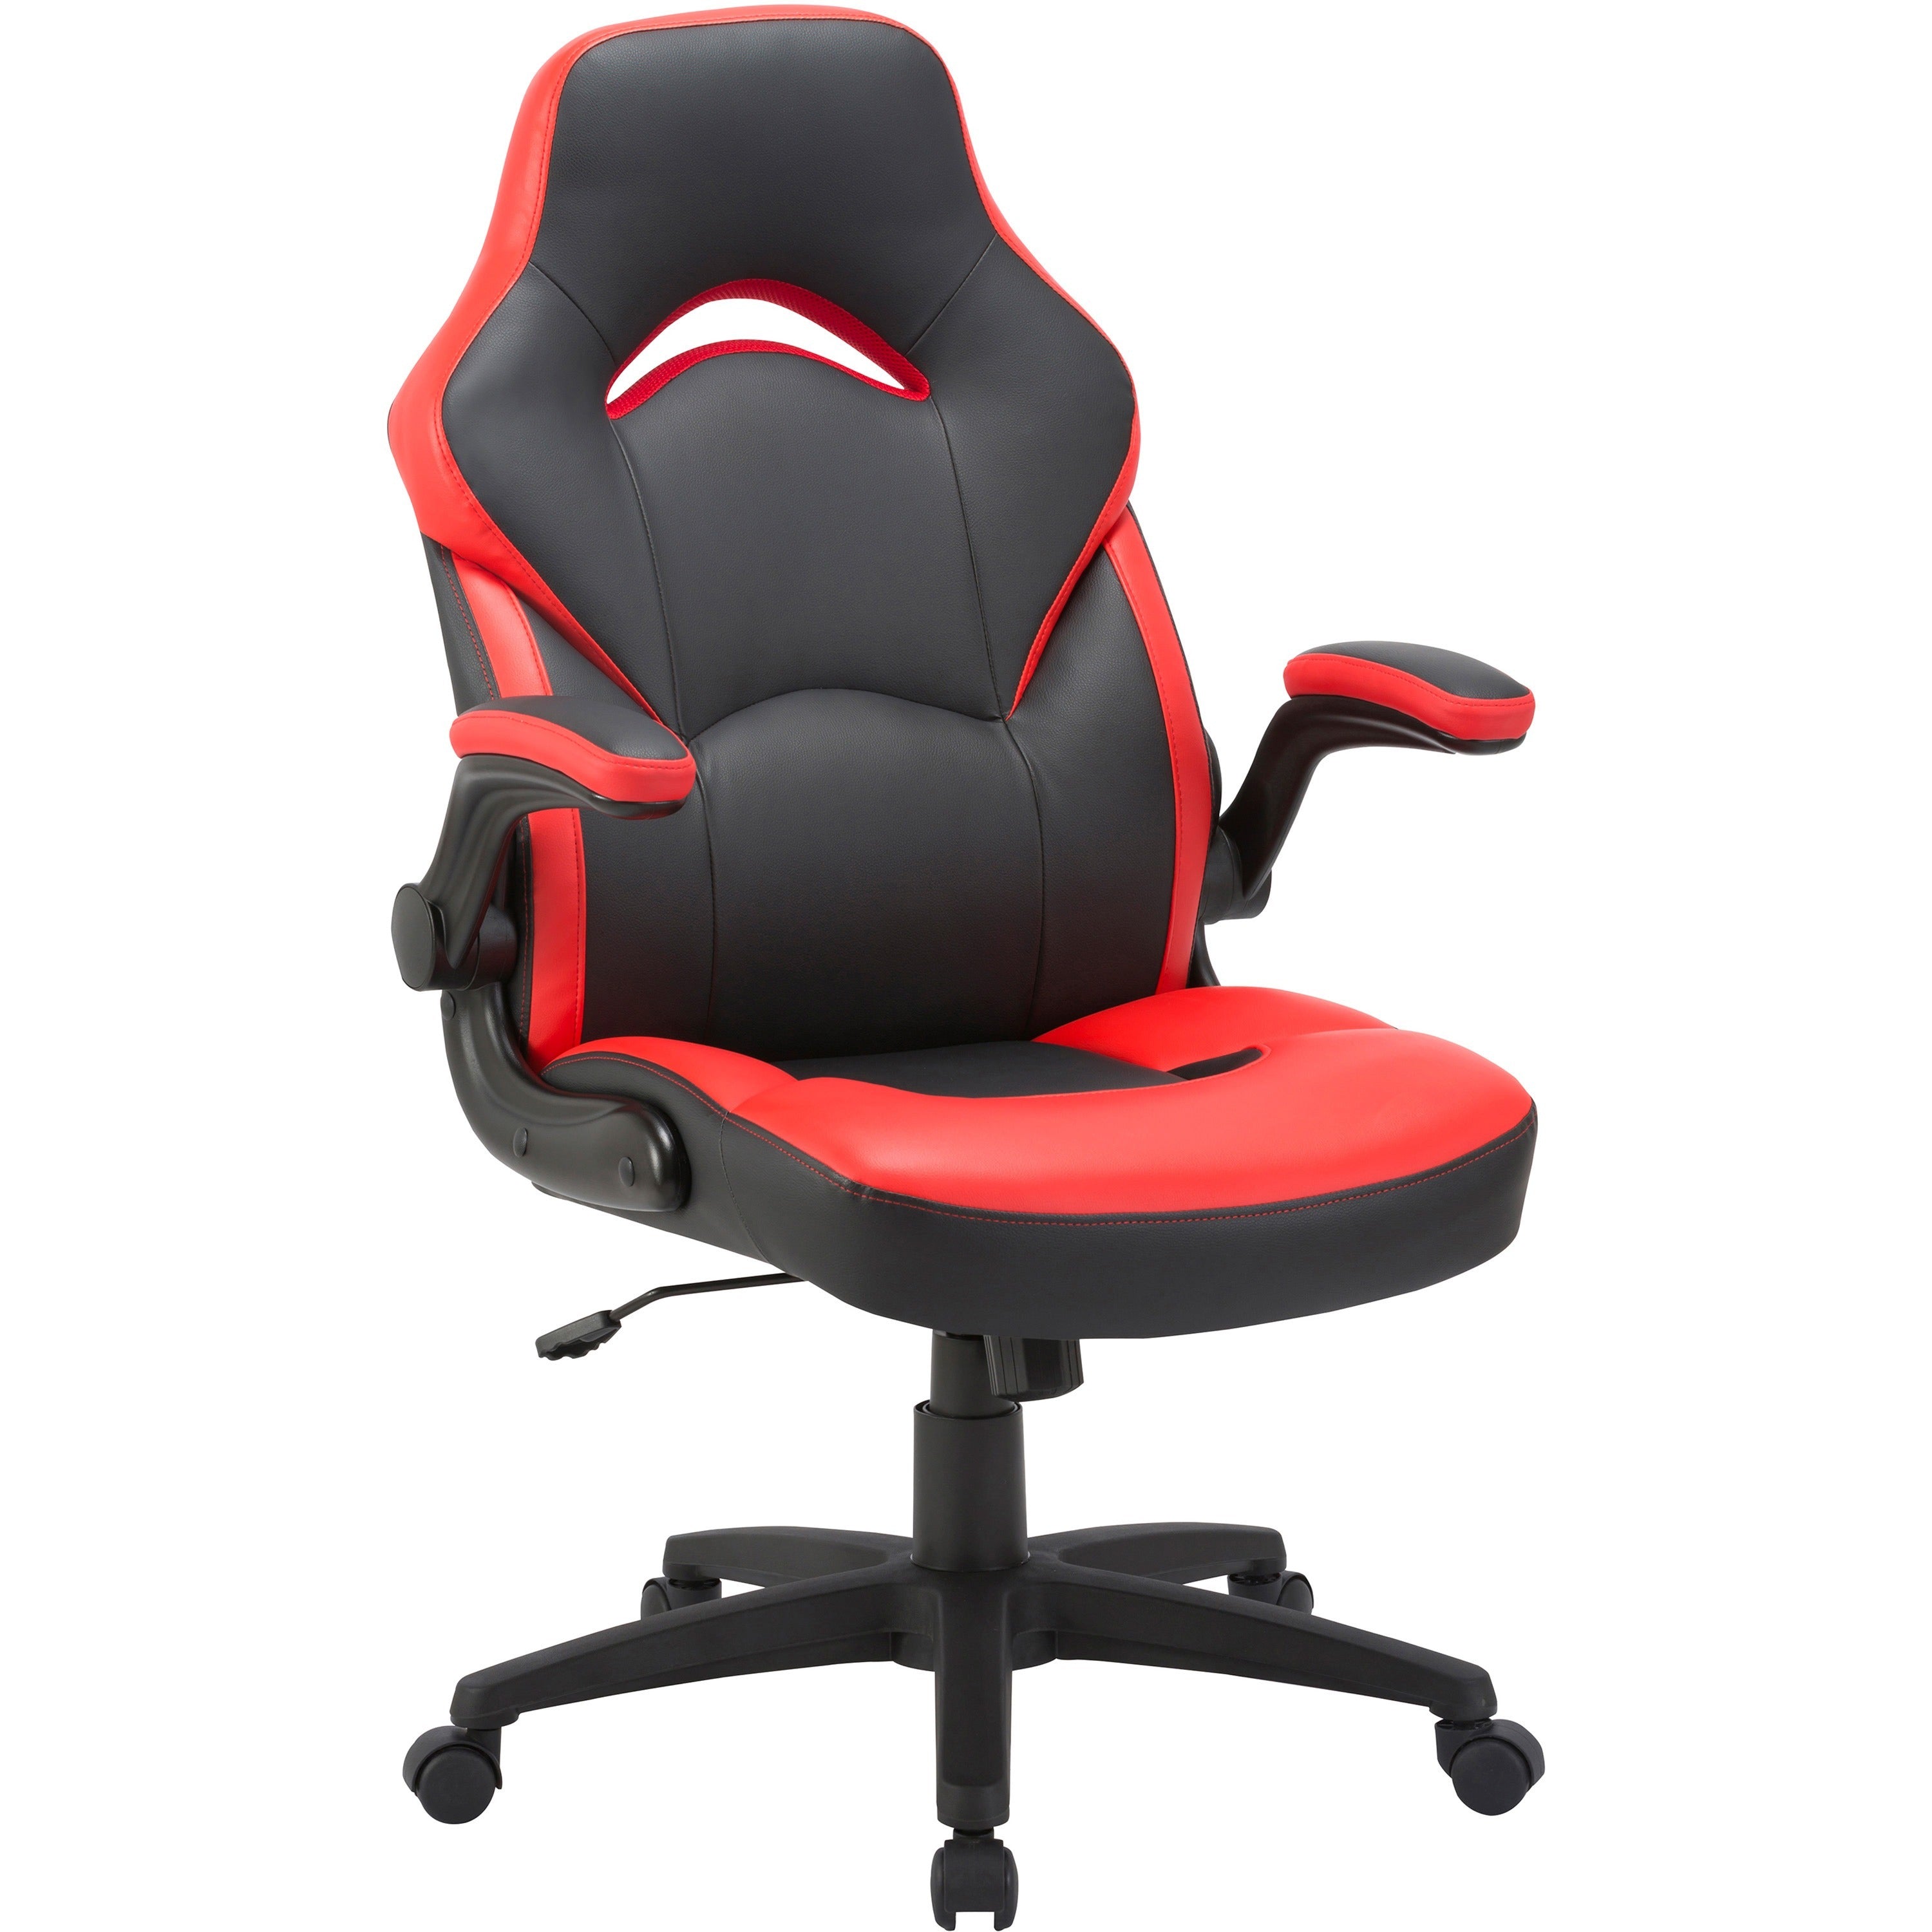 lorell-bucket-seat-high-back-gaming-chair-red-black-seat-red-black-back-5-star-base-28-length-x-205-width-x-475-height_llr84387 - 1